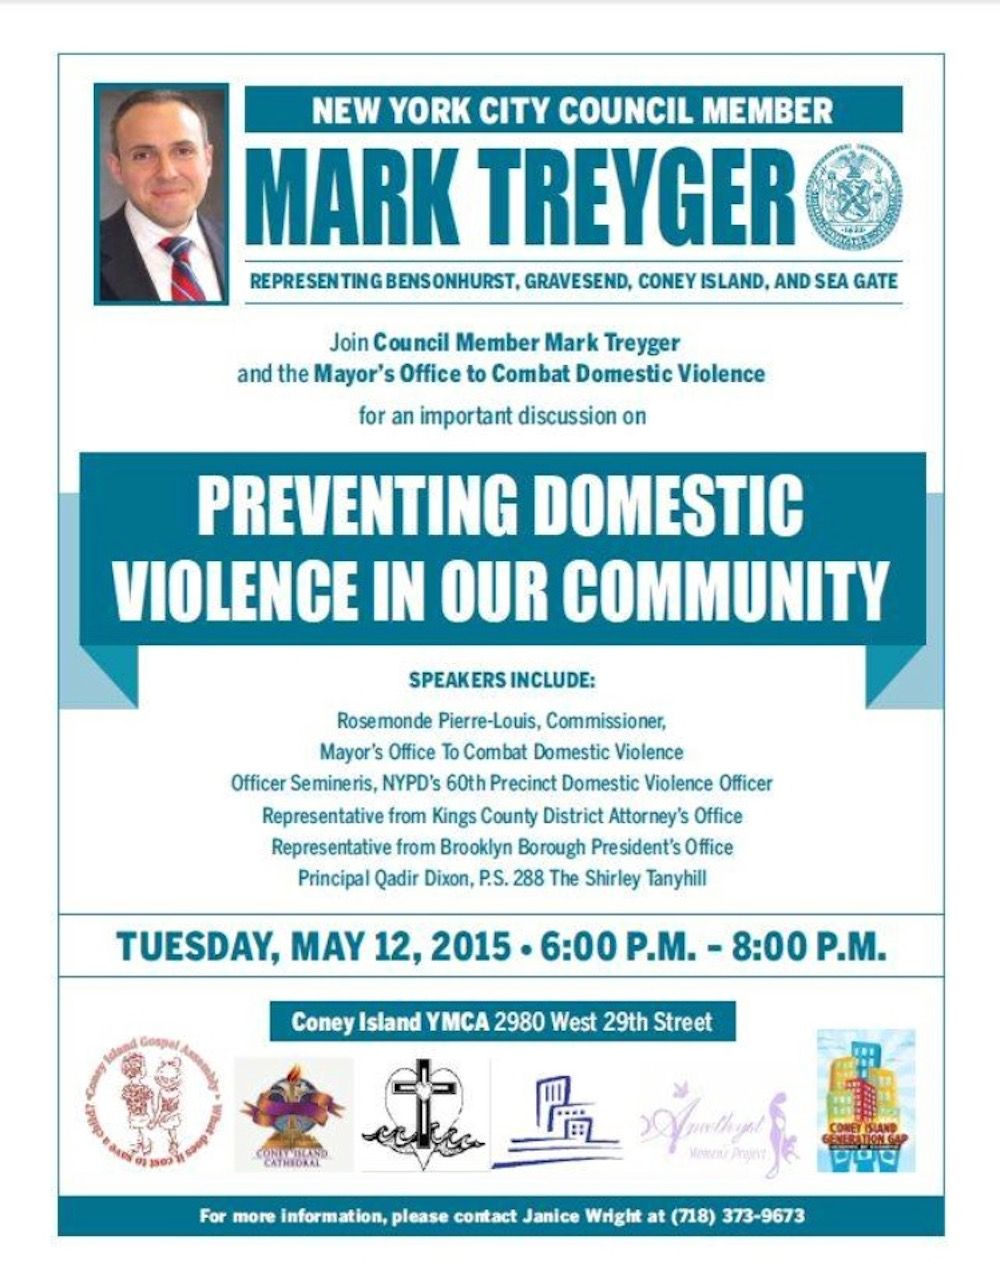 Tuesday: Anti-Domestic Violence Panel At YMCA Coney Island